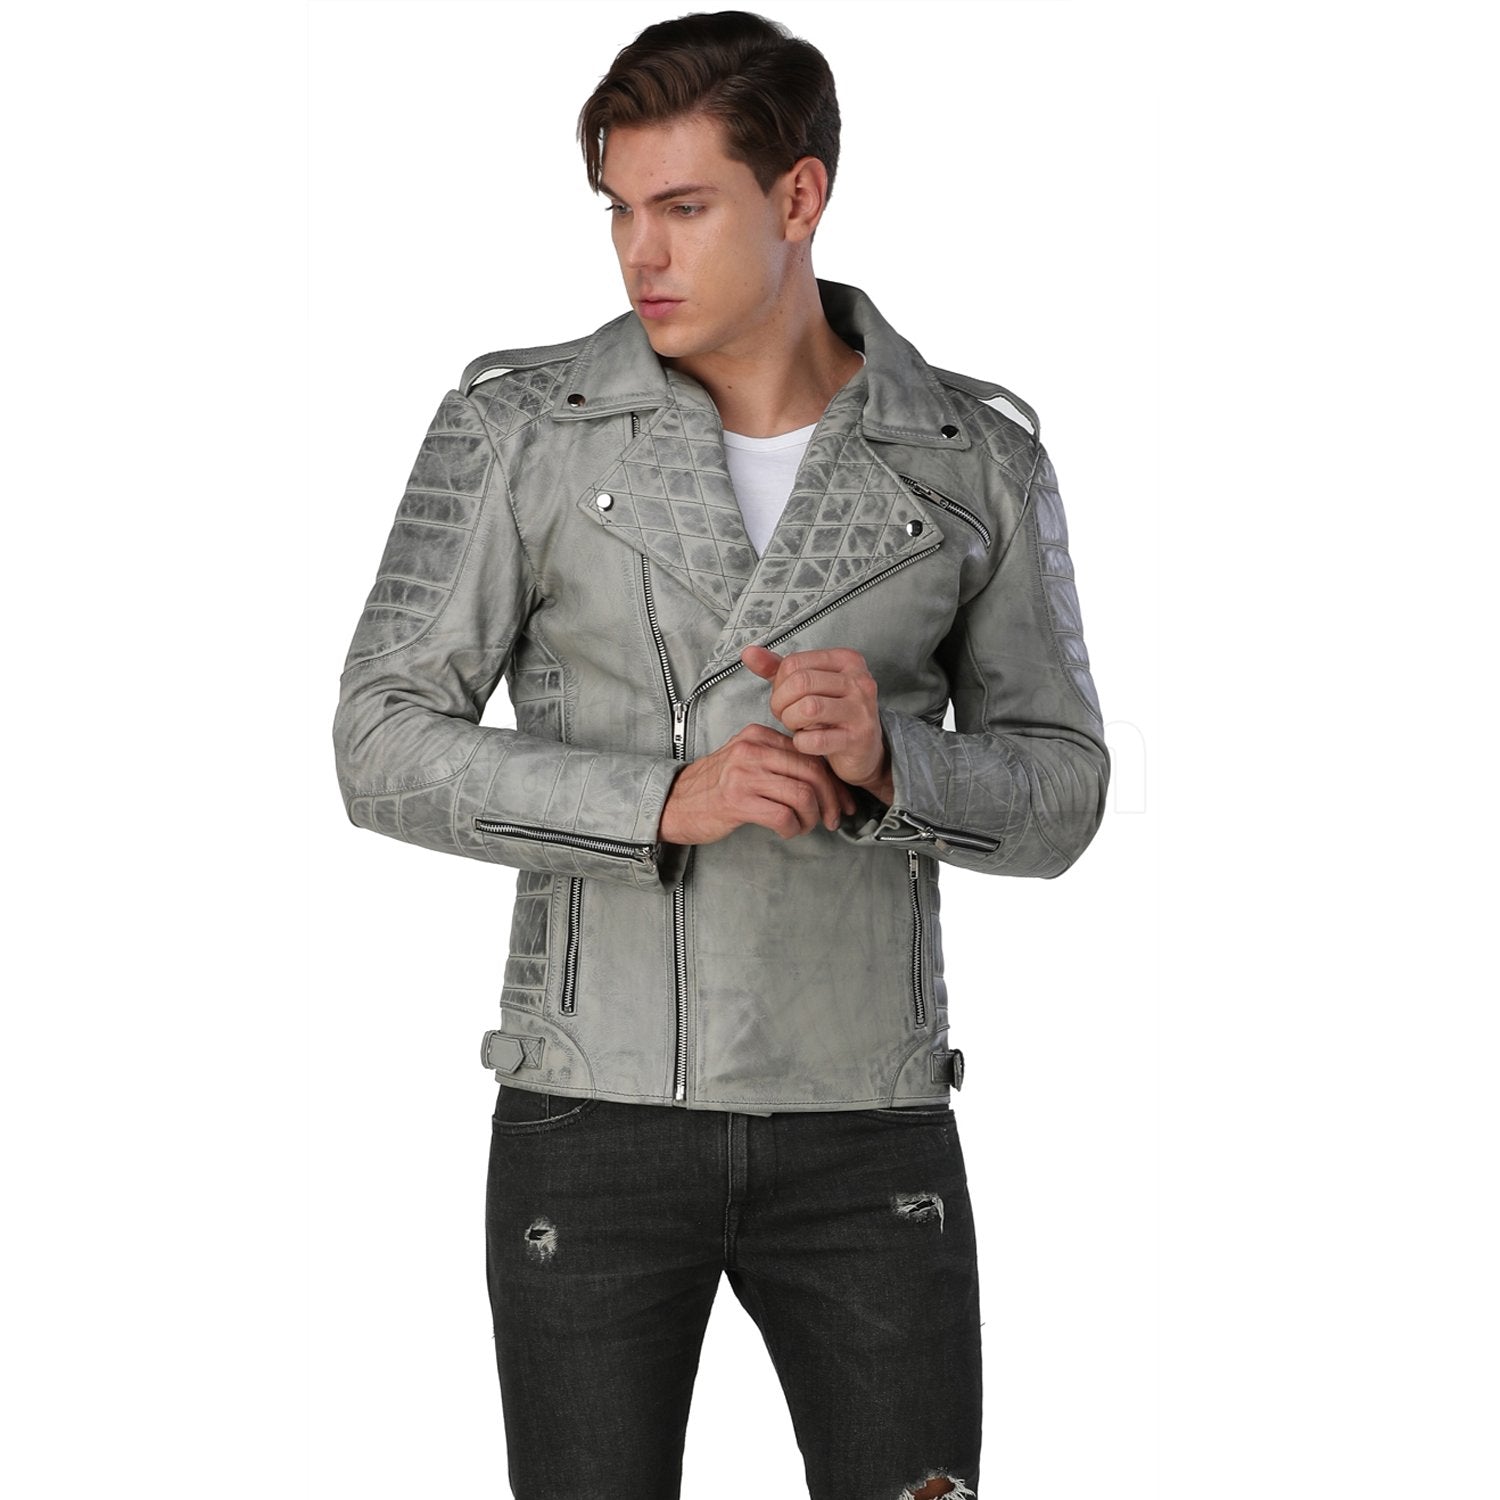 LEATHER EFFECT CROPPED BIKER JACKET - Charcoal